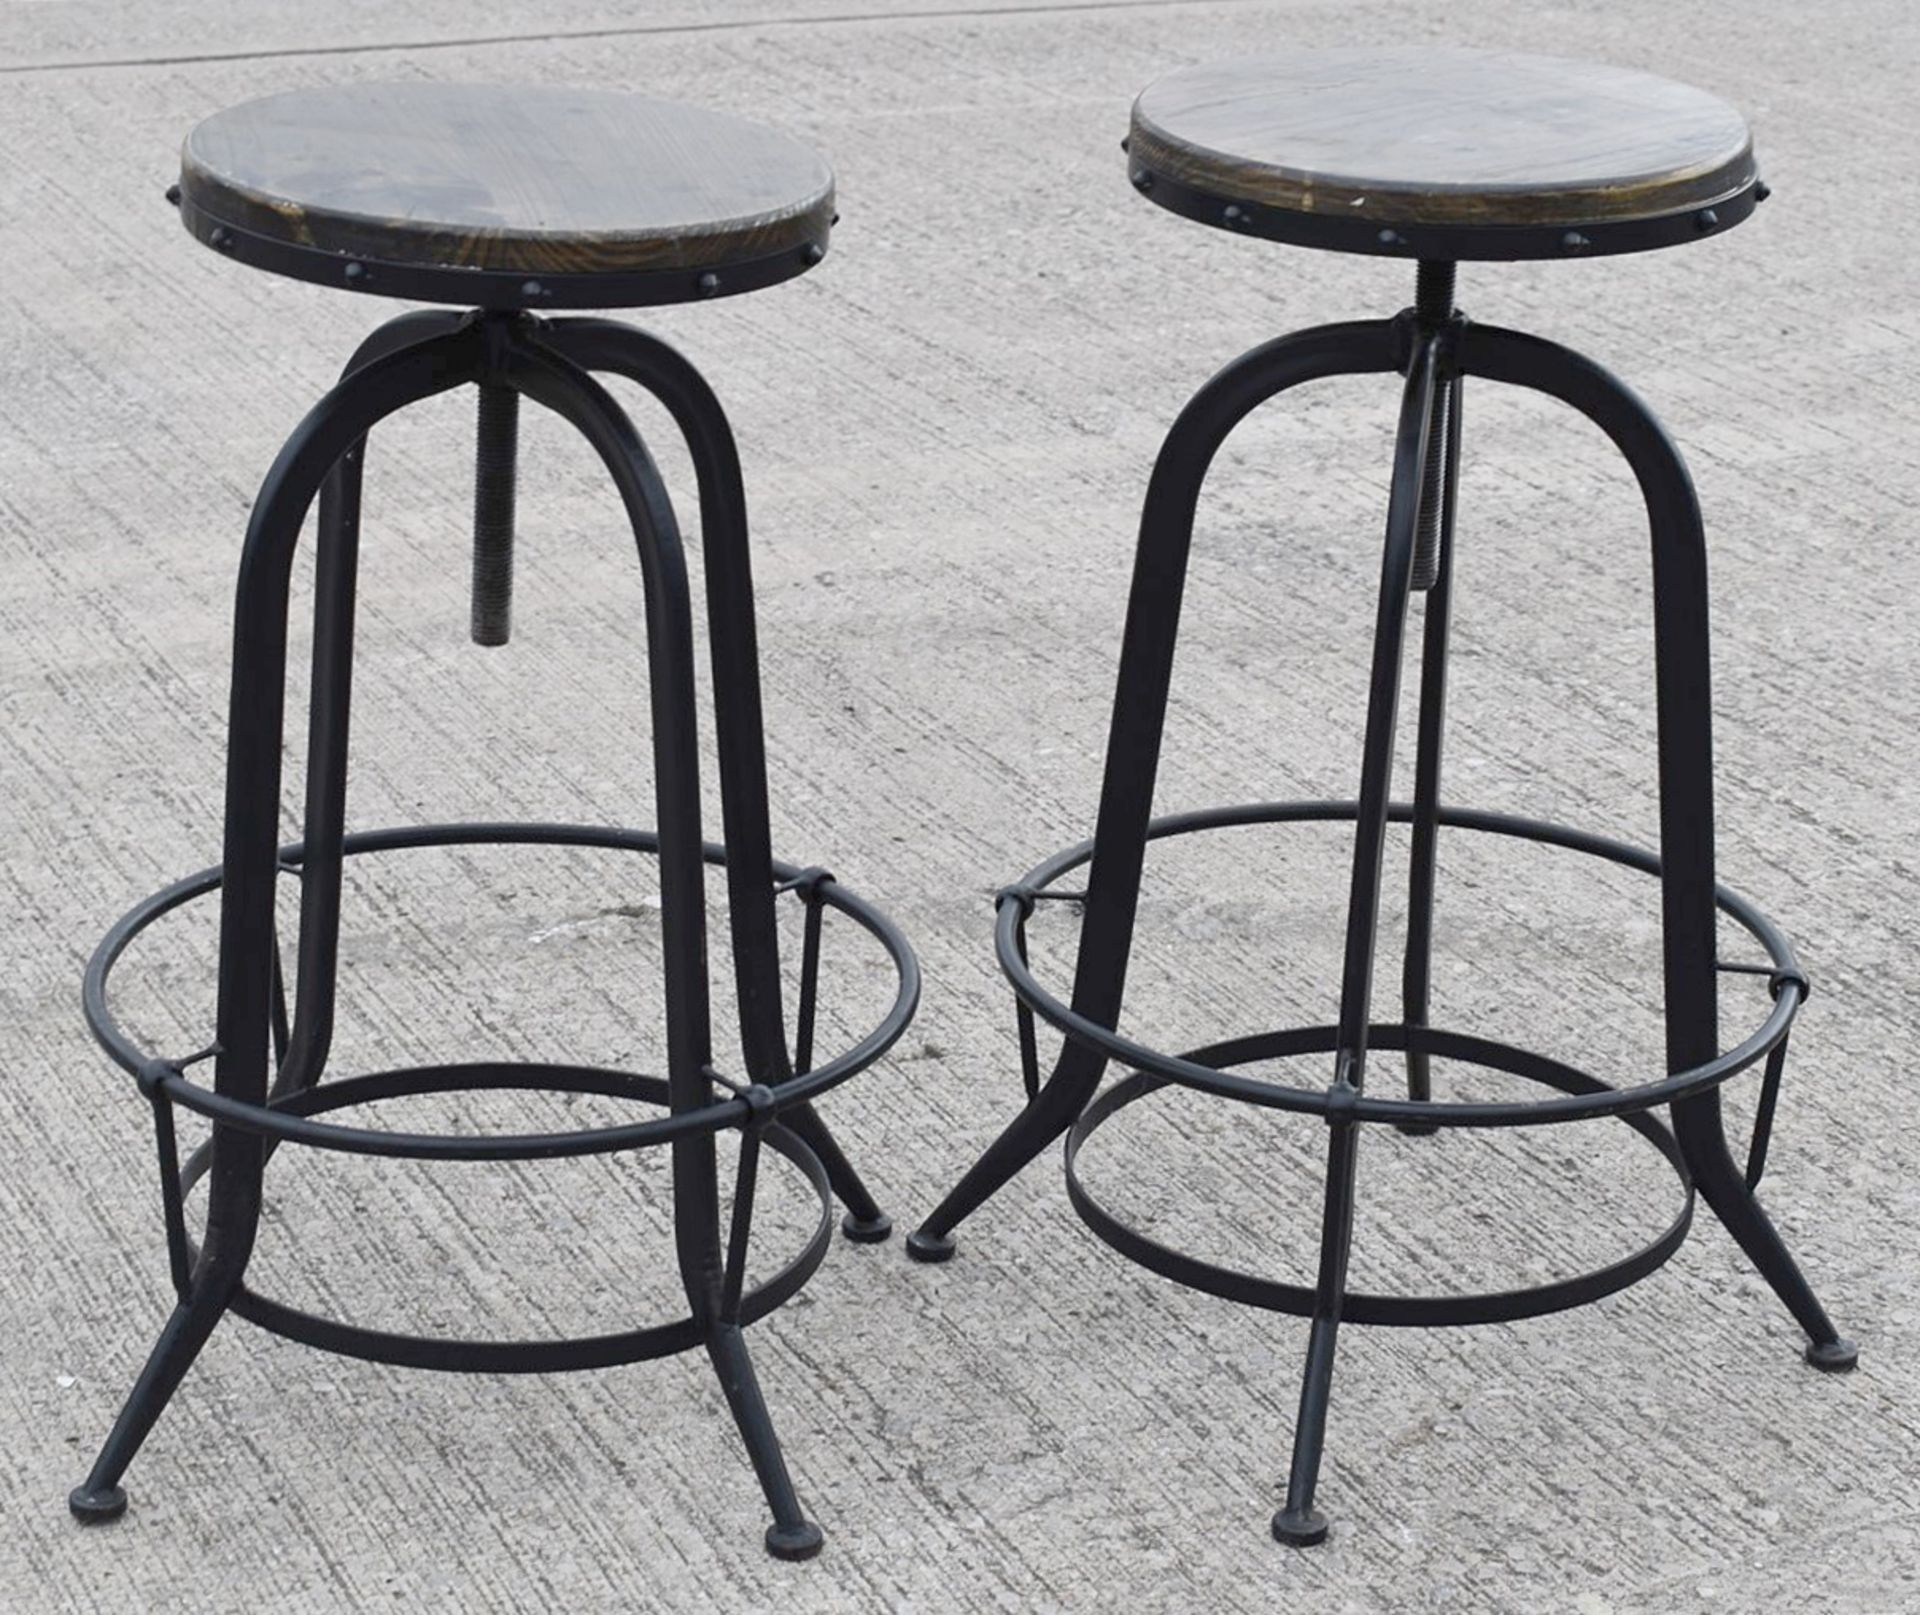 Pair of Rustic Iron Adjustable Bar Stools With Curved Legs and Wooden Seats - Image 2 of 6